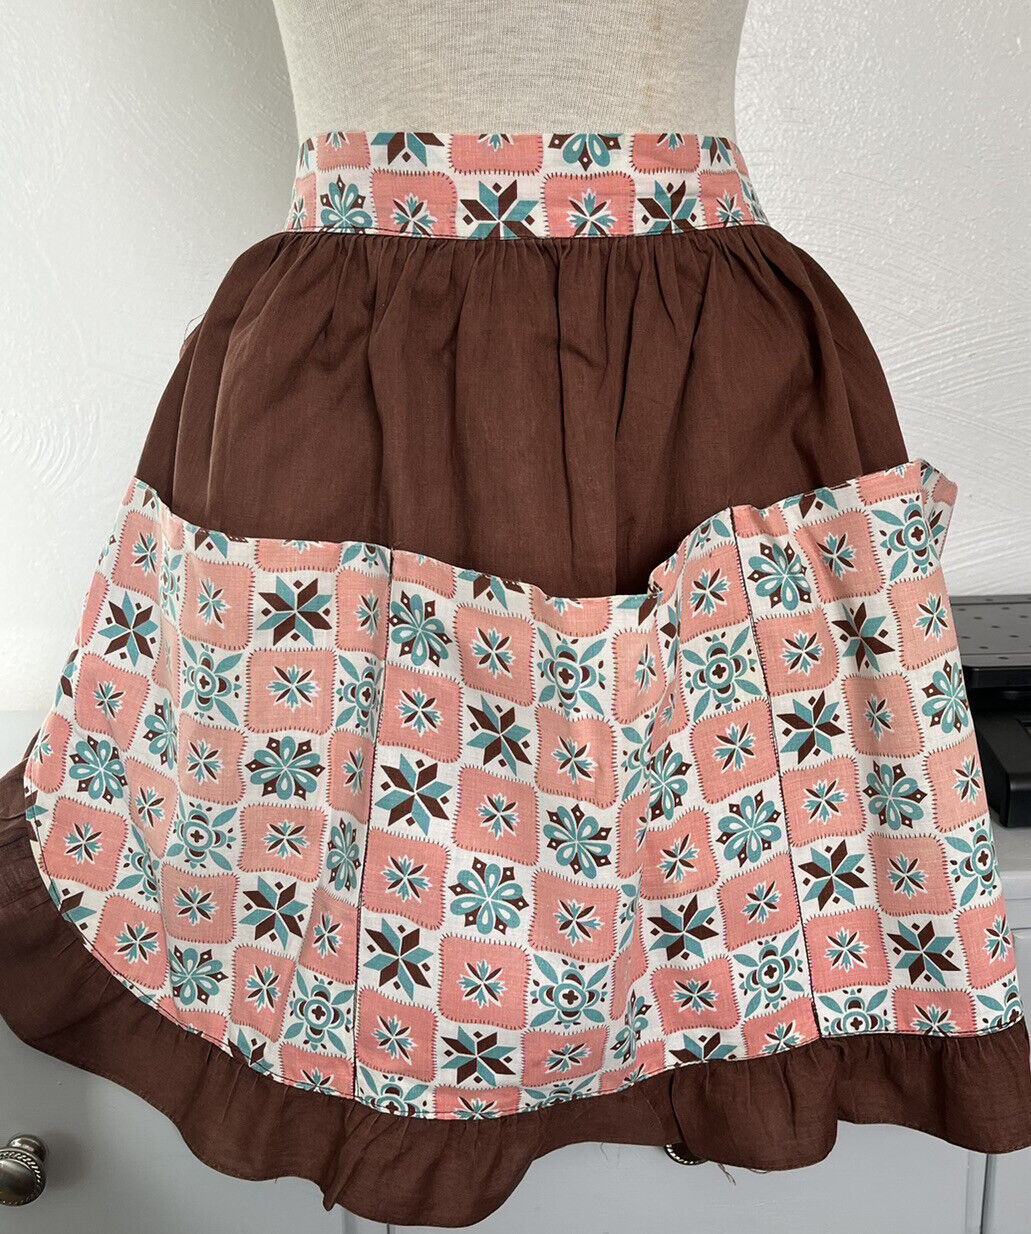 Vintage Handmade Cotton Apron With Pockets Pleated Brown Pink Teal - As Is